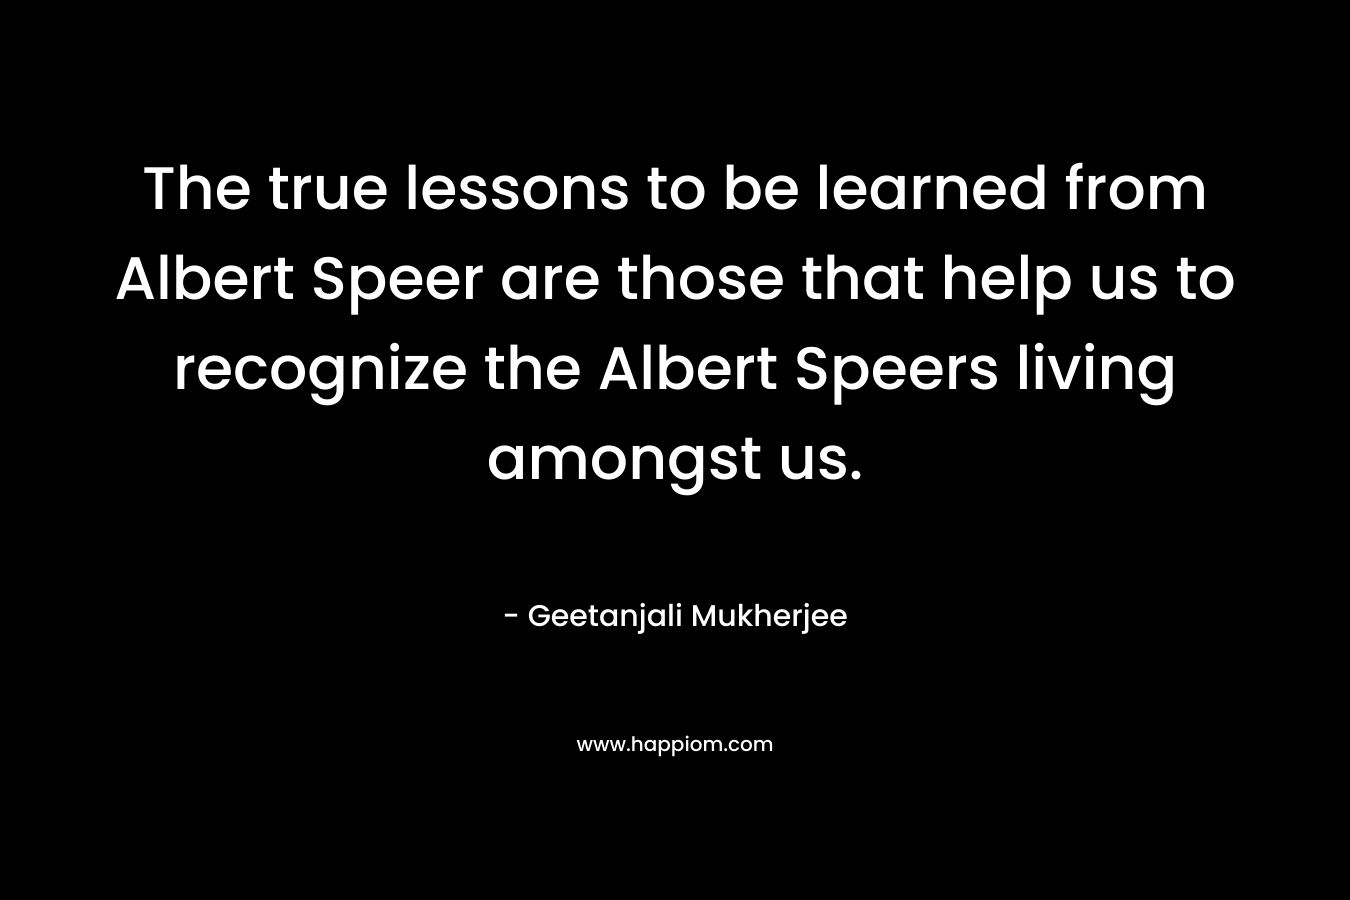 The true lessons to be learned from Albert Speer are those that help us to recognize the Albert Speers living amongst us. – Geetanjali Mukherjee